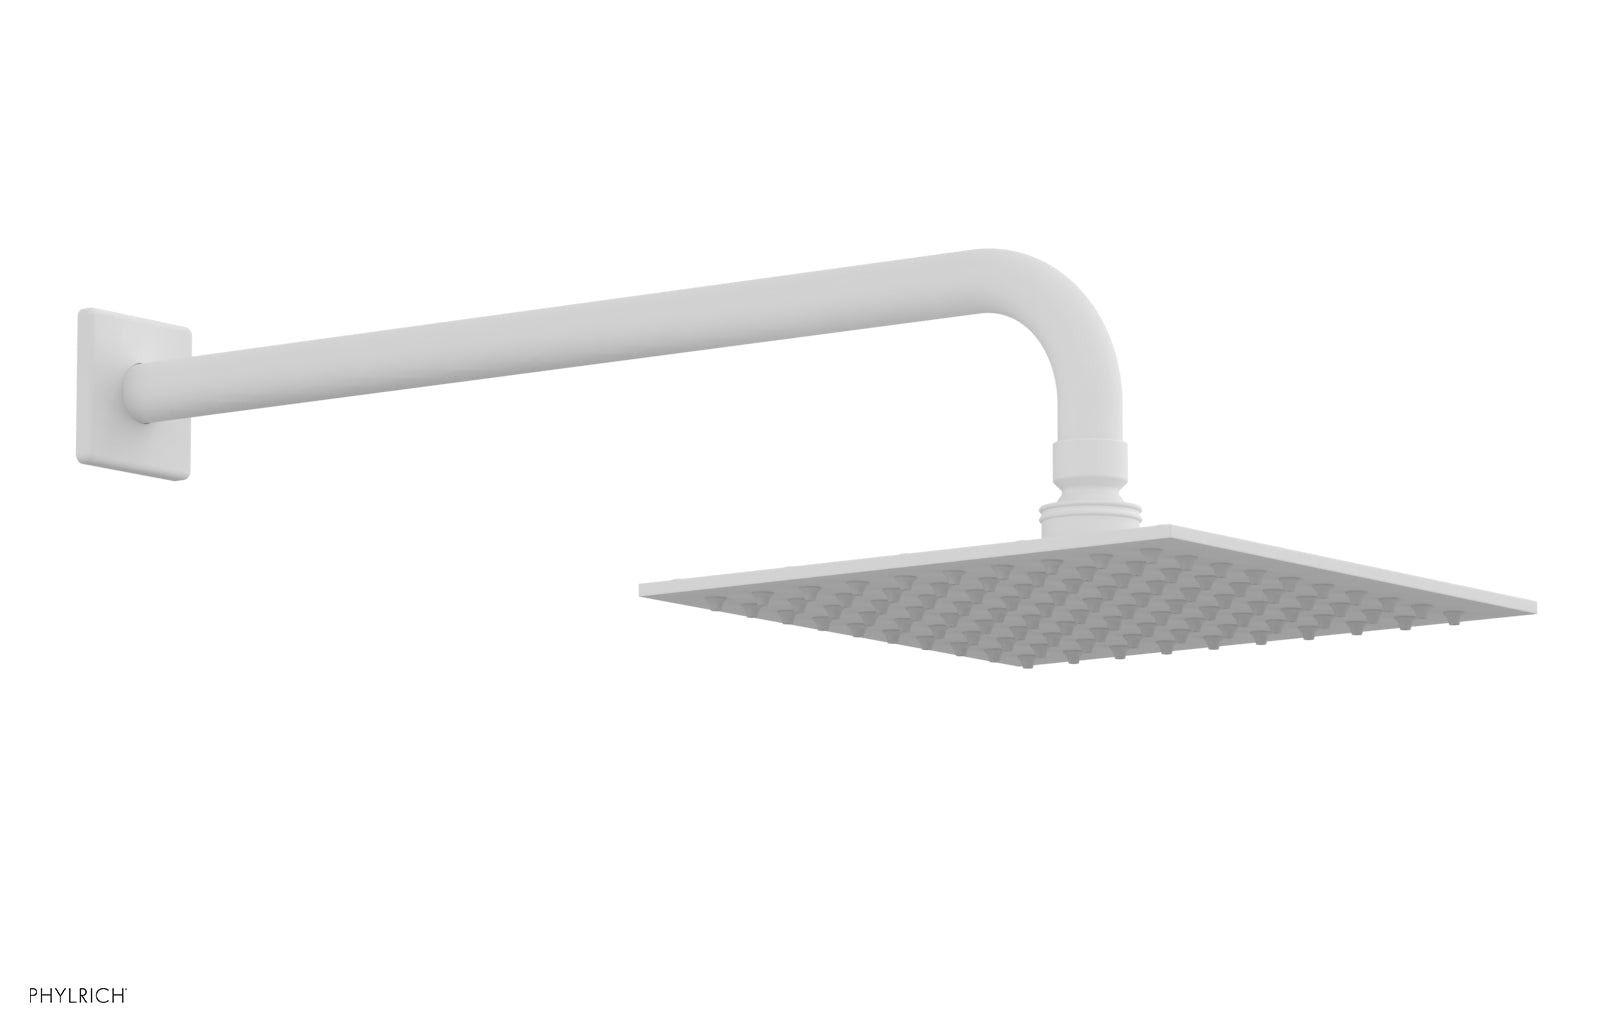 Phylrich 8" Square Shower Head